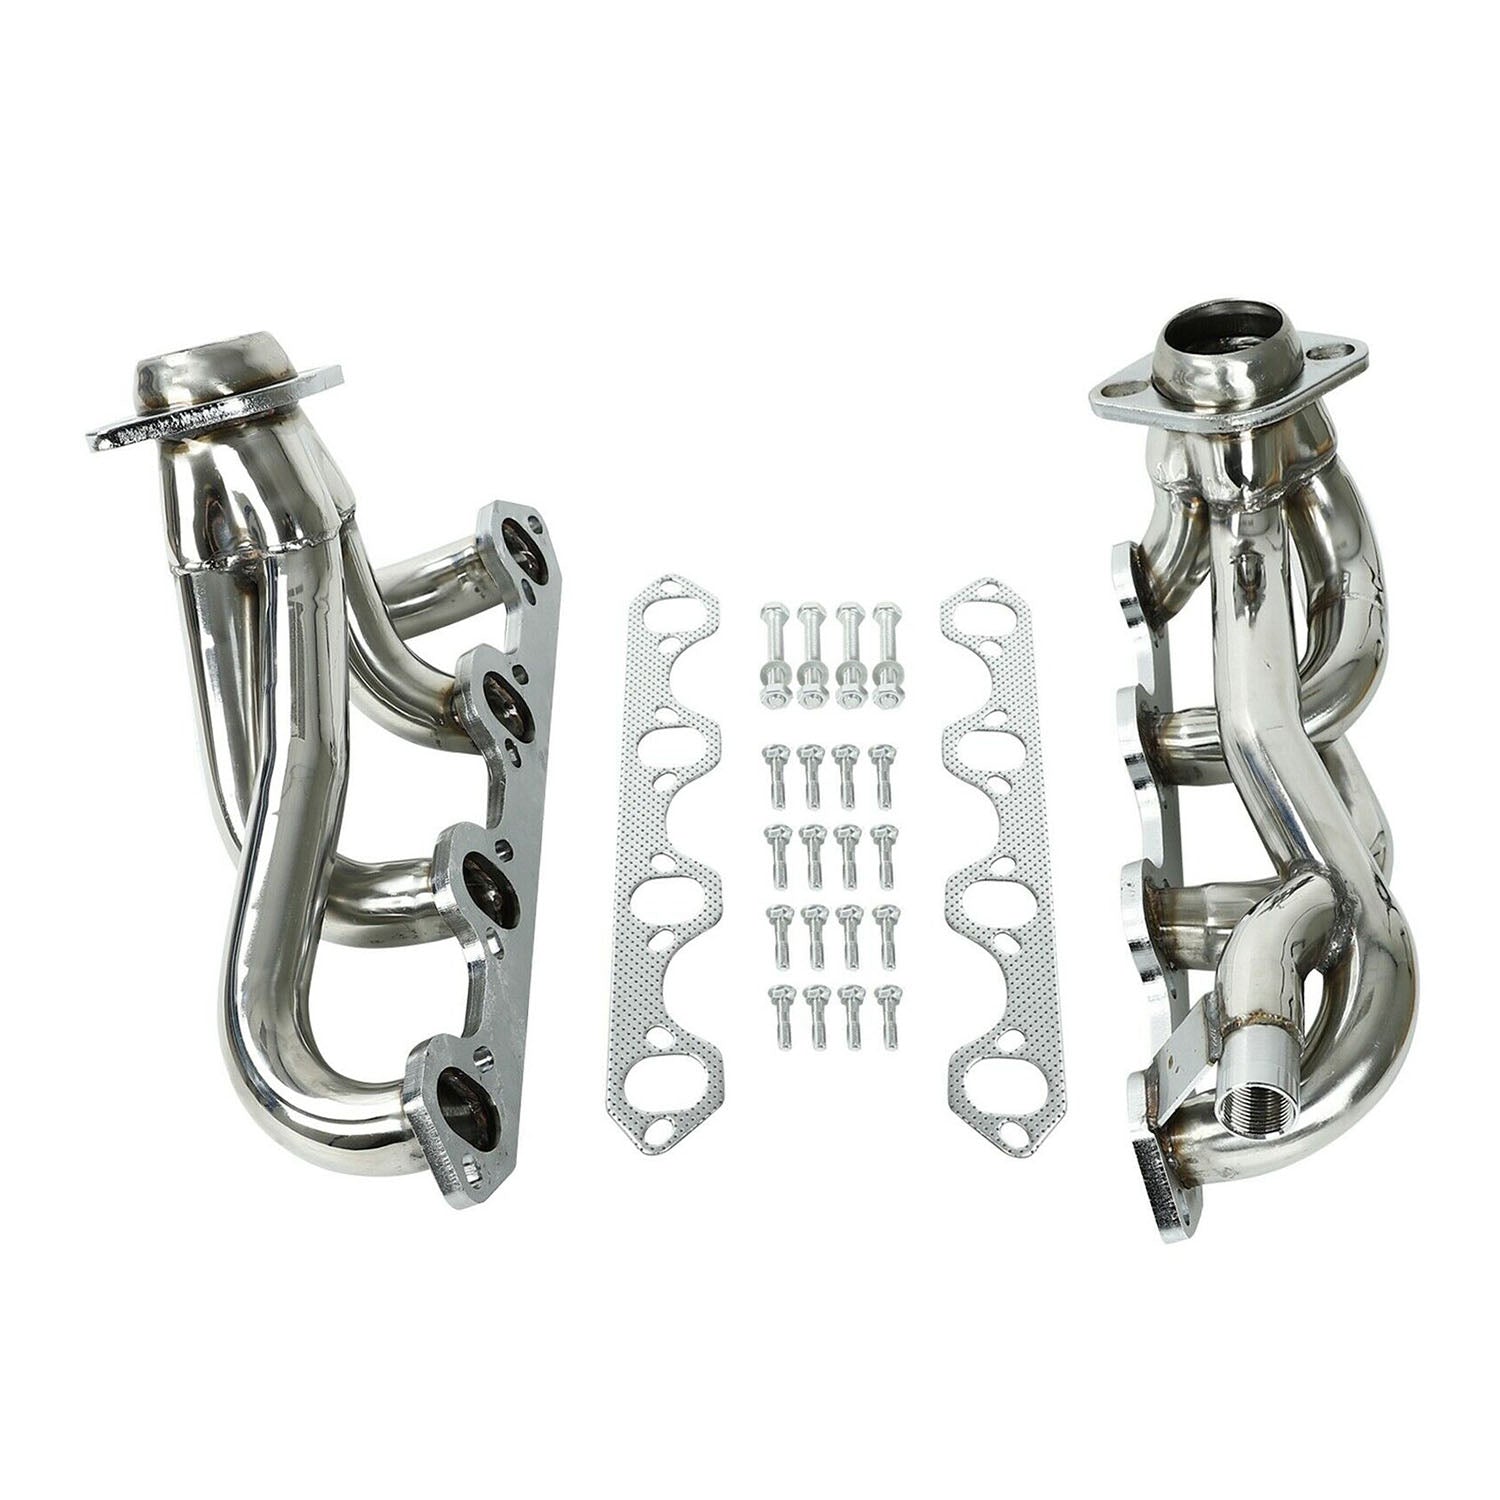 Exhaust Manifold Headers for 1987-1996 Ford F150 F250 Bronco 5.8L V8